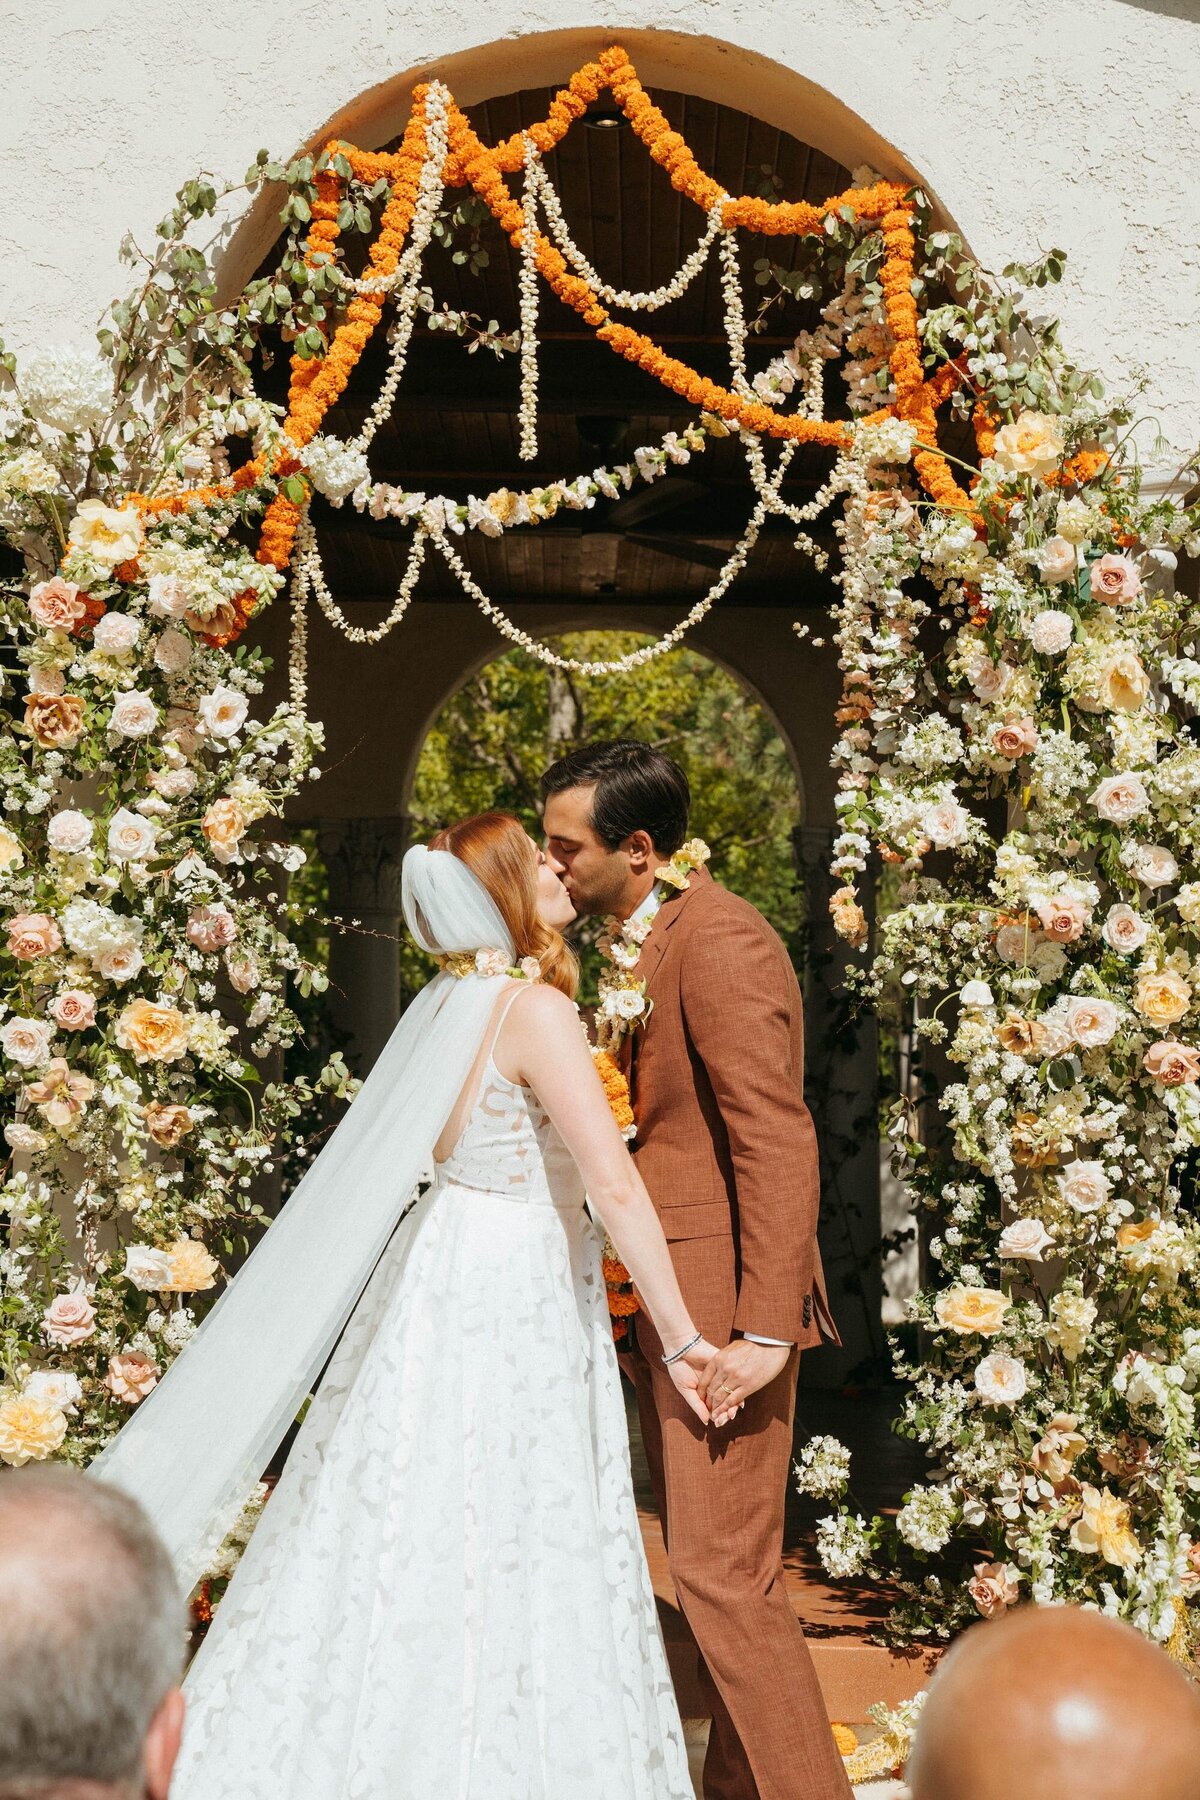 A couple kisses at their wedding ceremony underneath a large Anthousai floral installation in an arch.